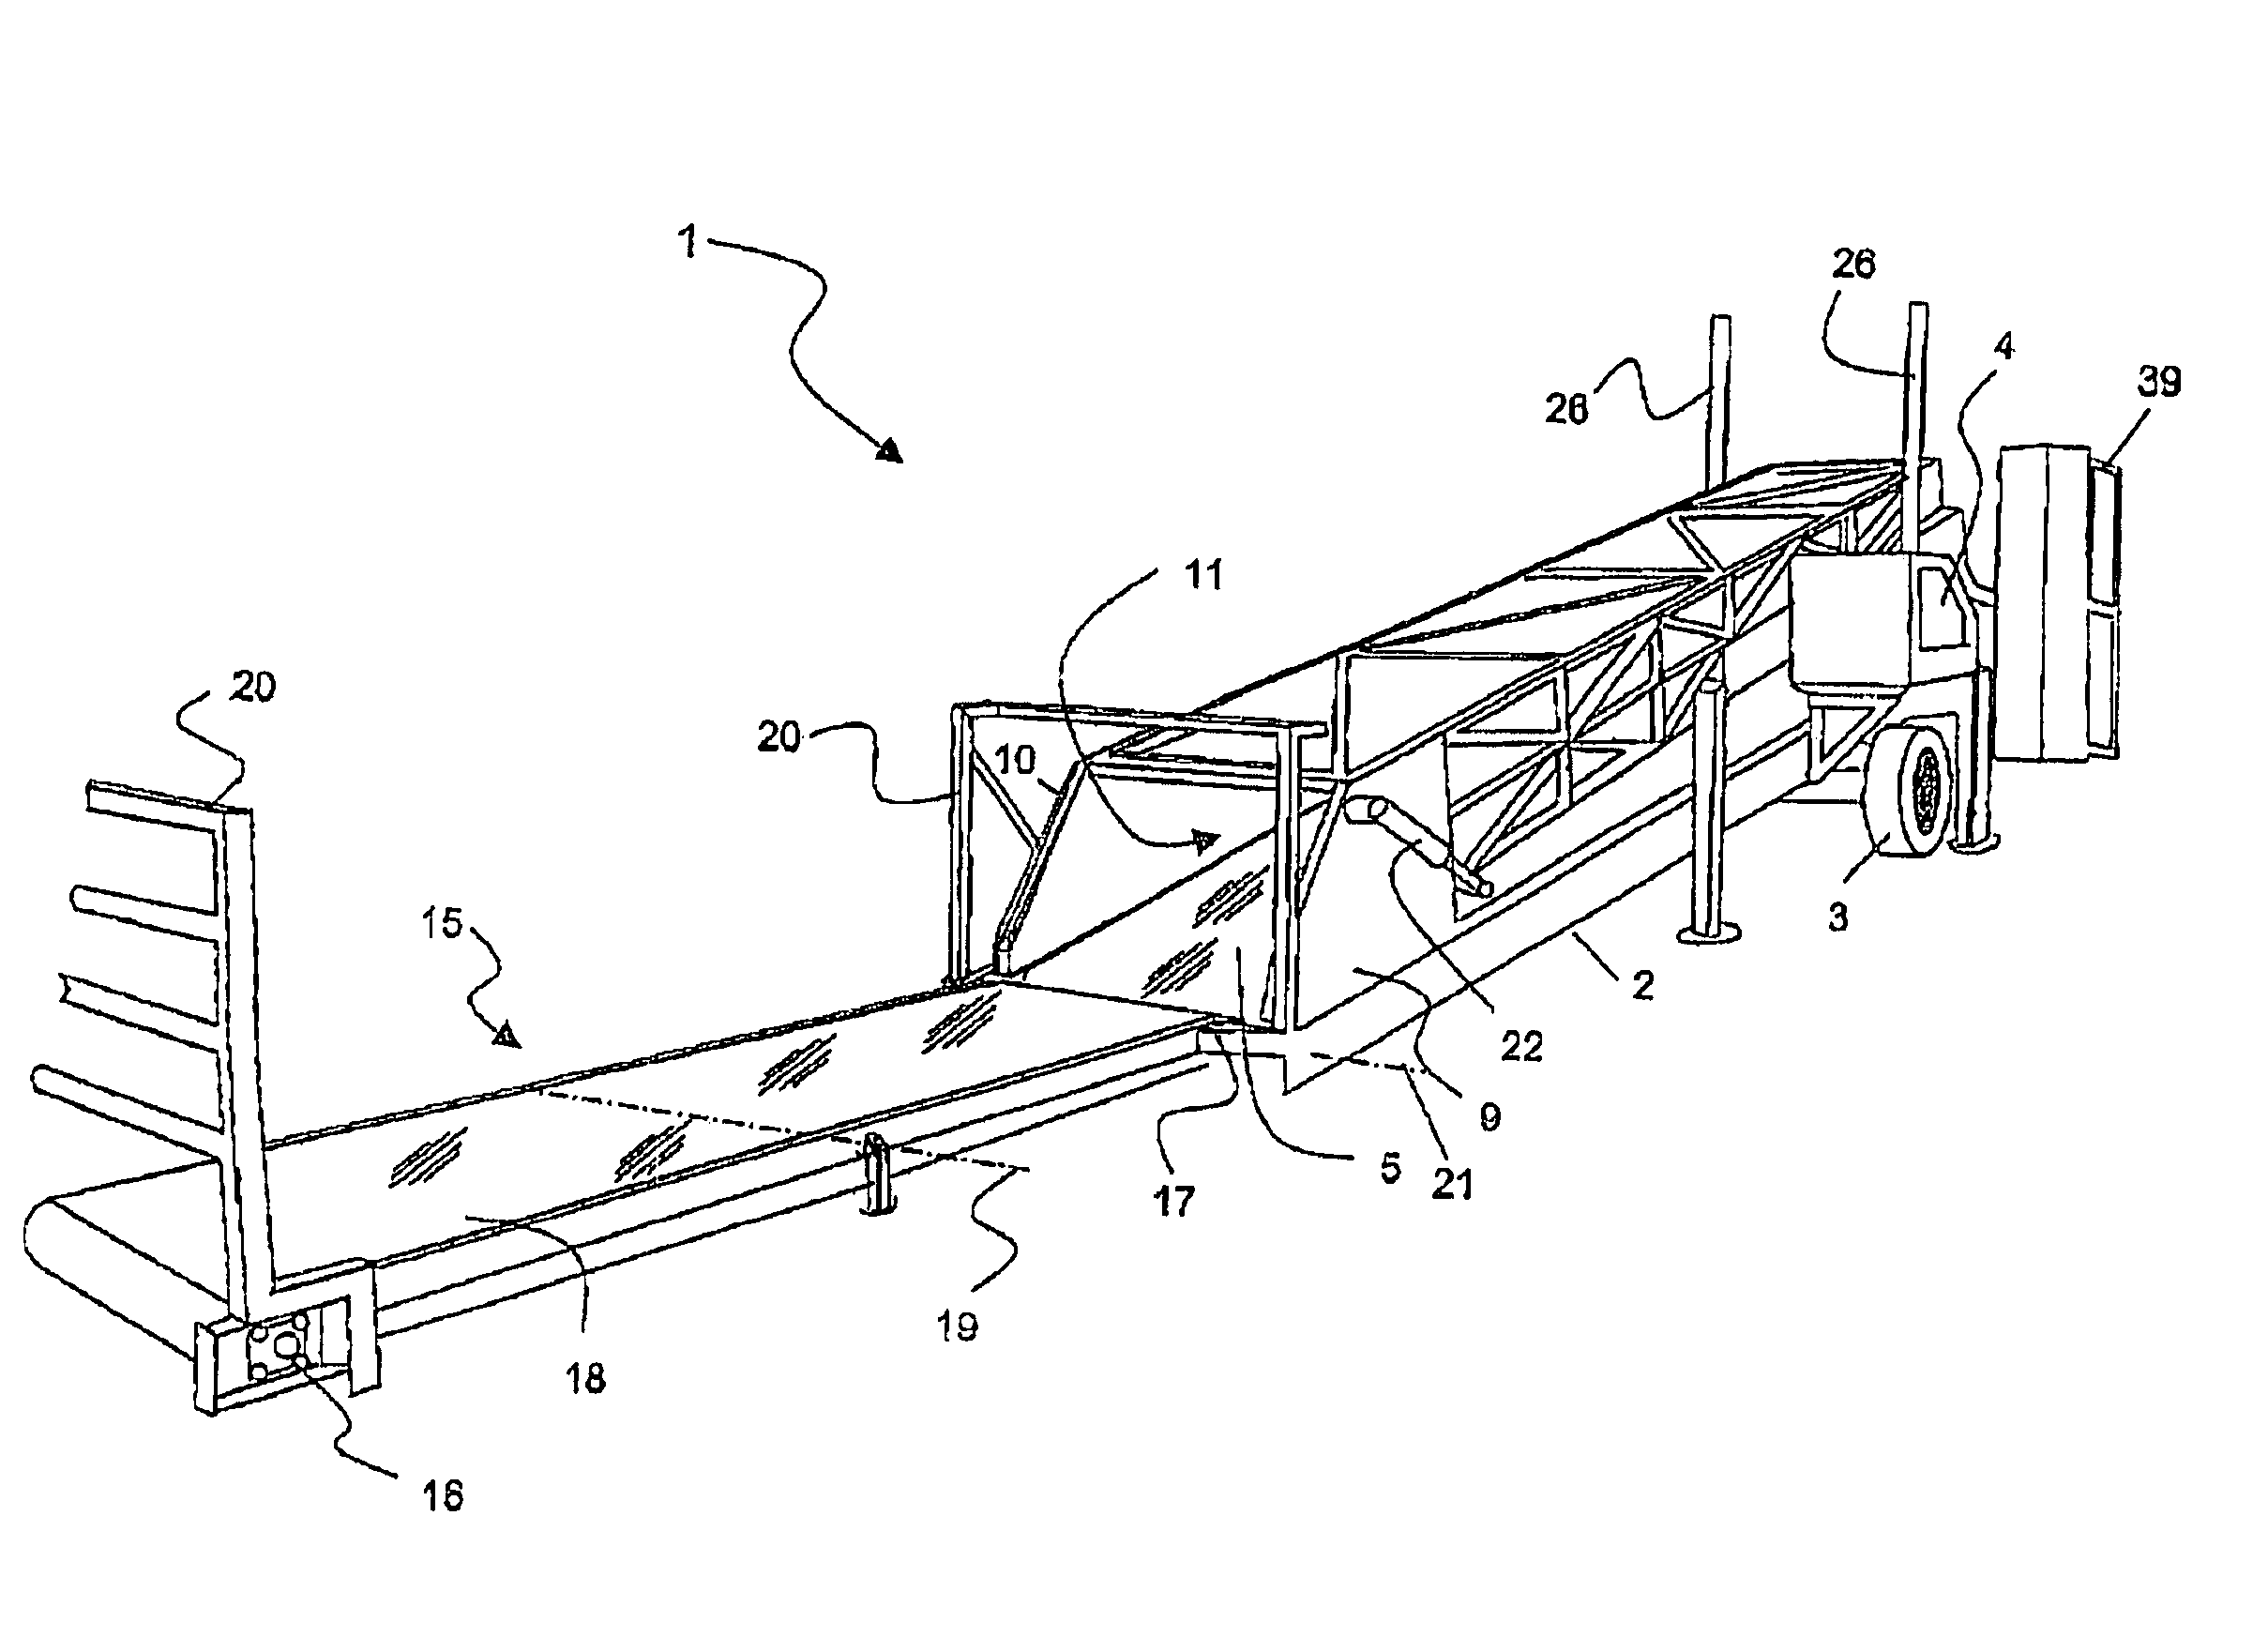 Poultry-loading machine